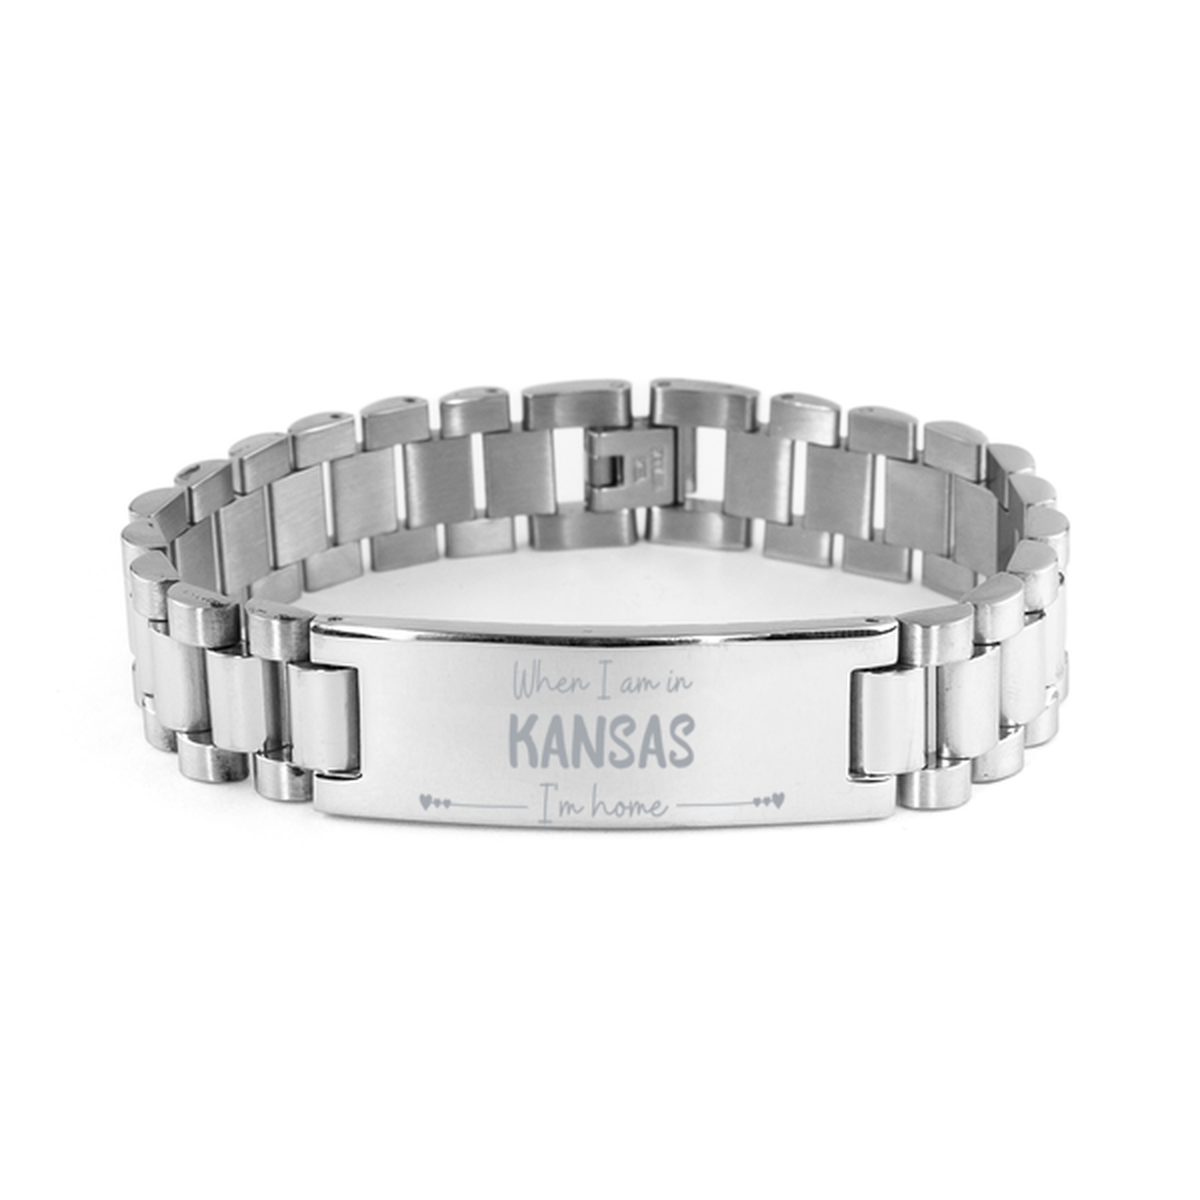 When I am in Kansas I'm home Ladder Stainless Steel Bracelet, Cheap Gifts For Kansas, State Kansas Birthday Gifts for Friends Coworker